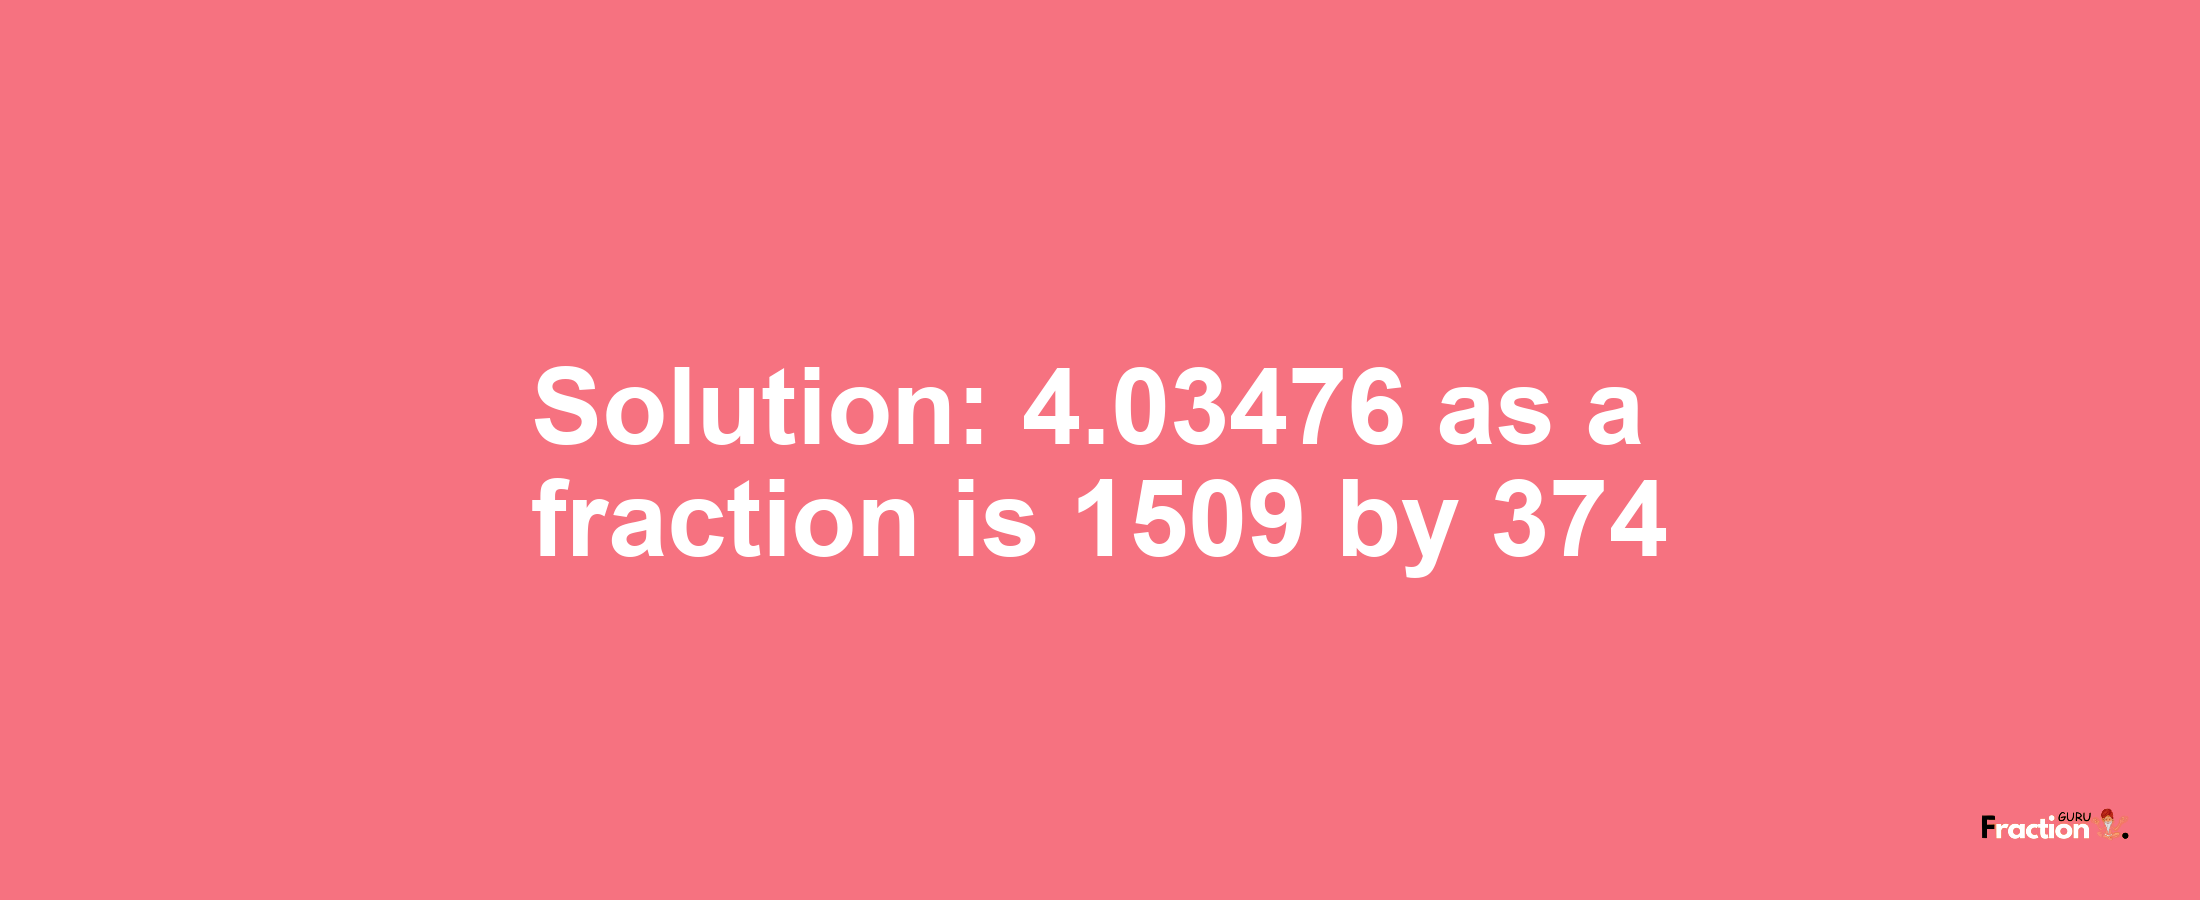 Solution:4.03476 as a fraction is 1509/374